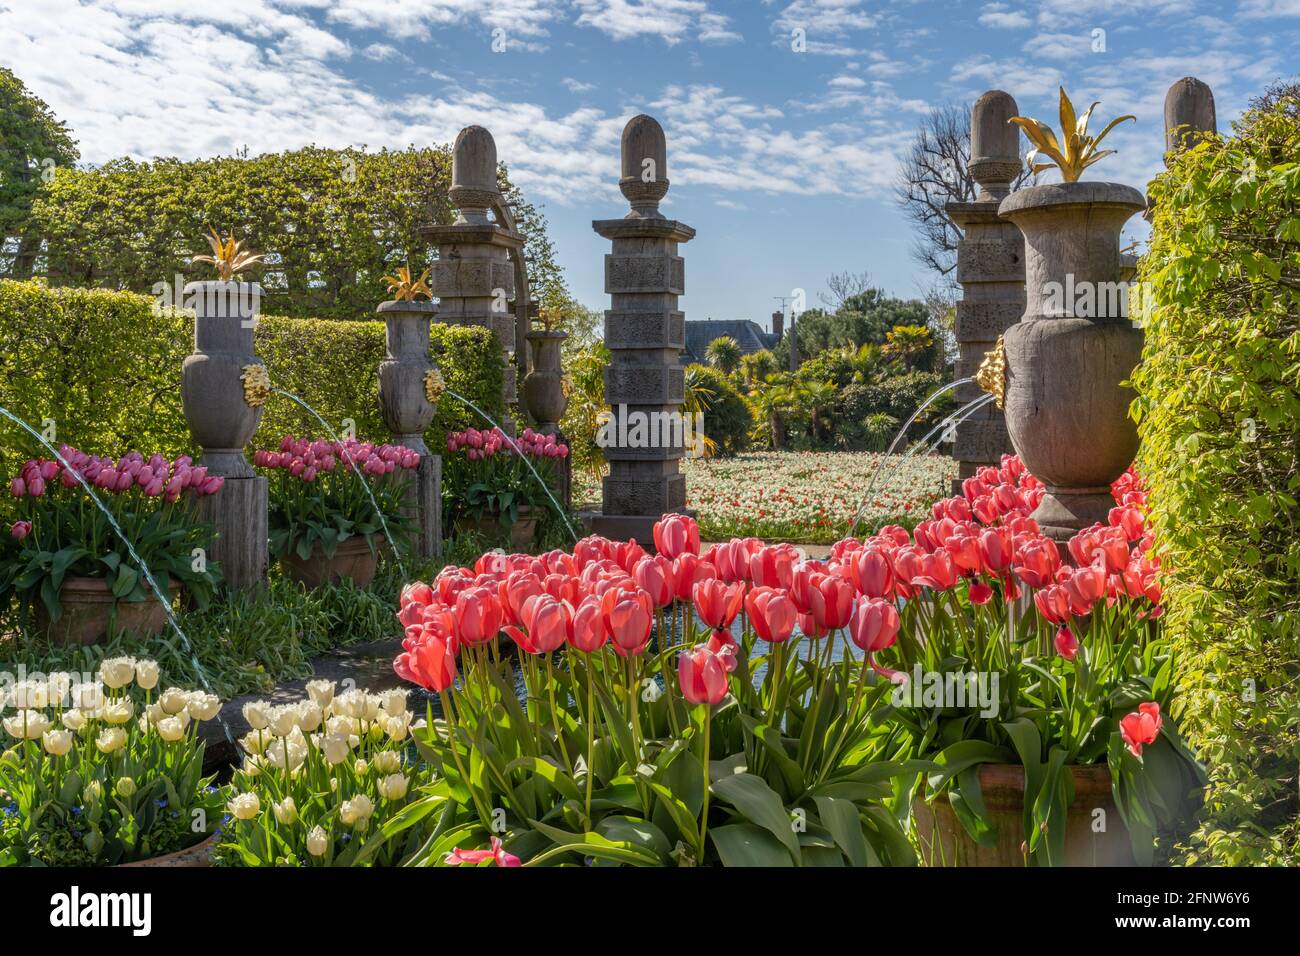 Once a year around May, Arundel Castle in West Sussex, hosts the Tulip festival where you can see approximately 60,000 tulips in the stunning gardens. Stock Photo